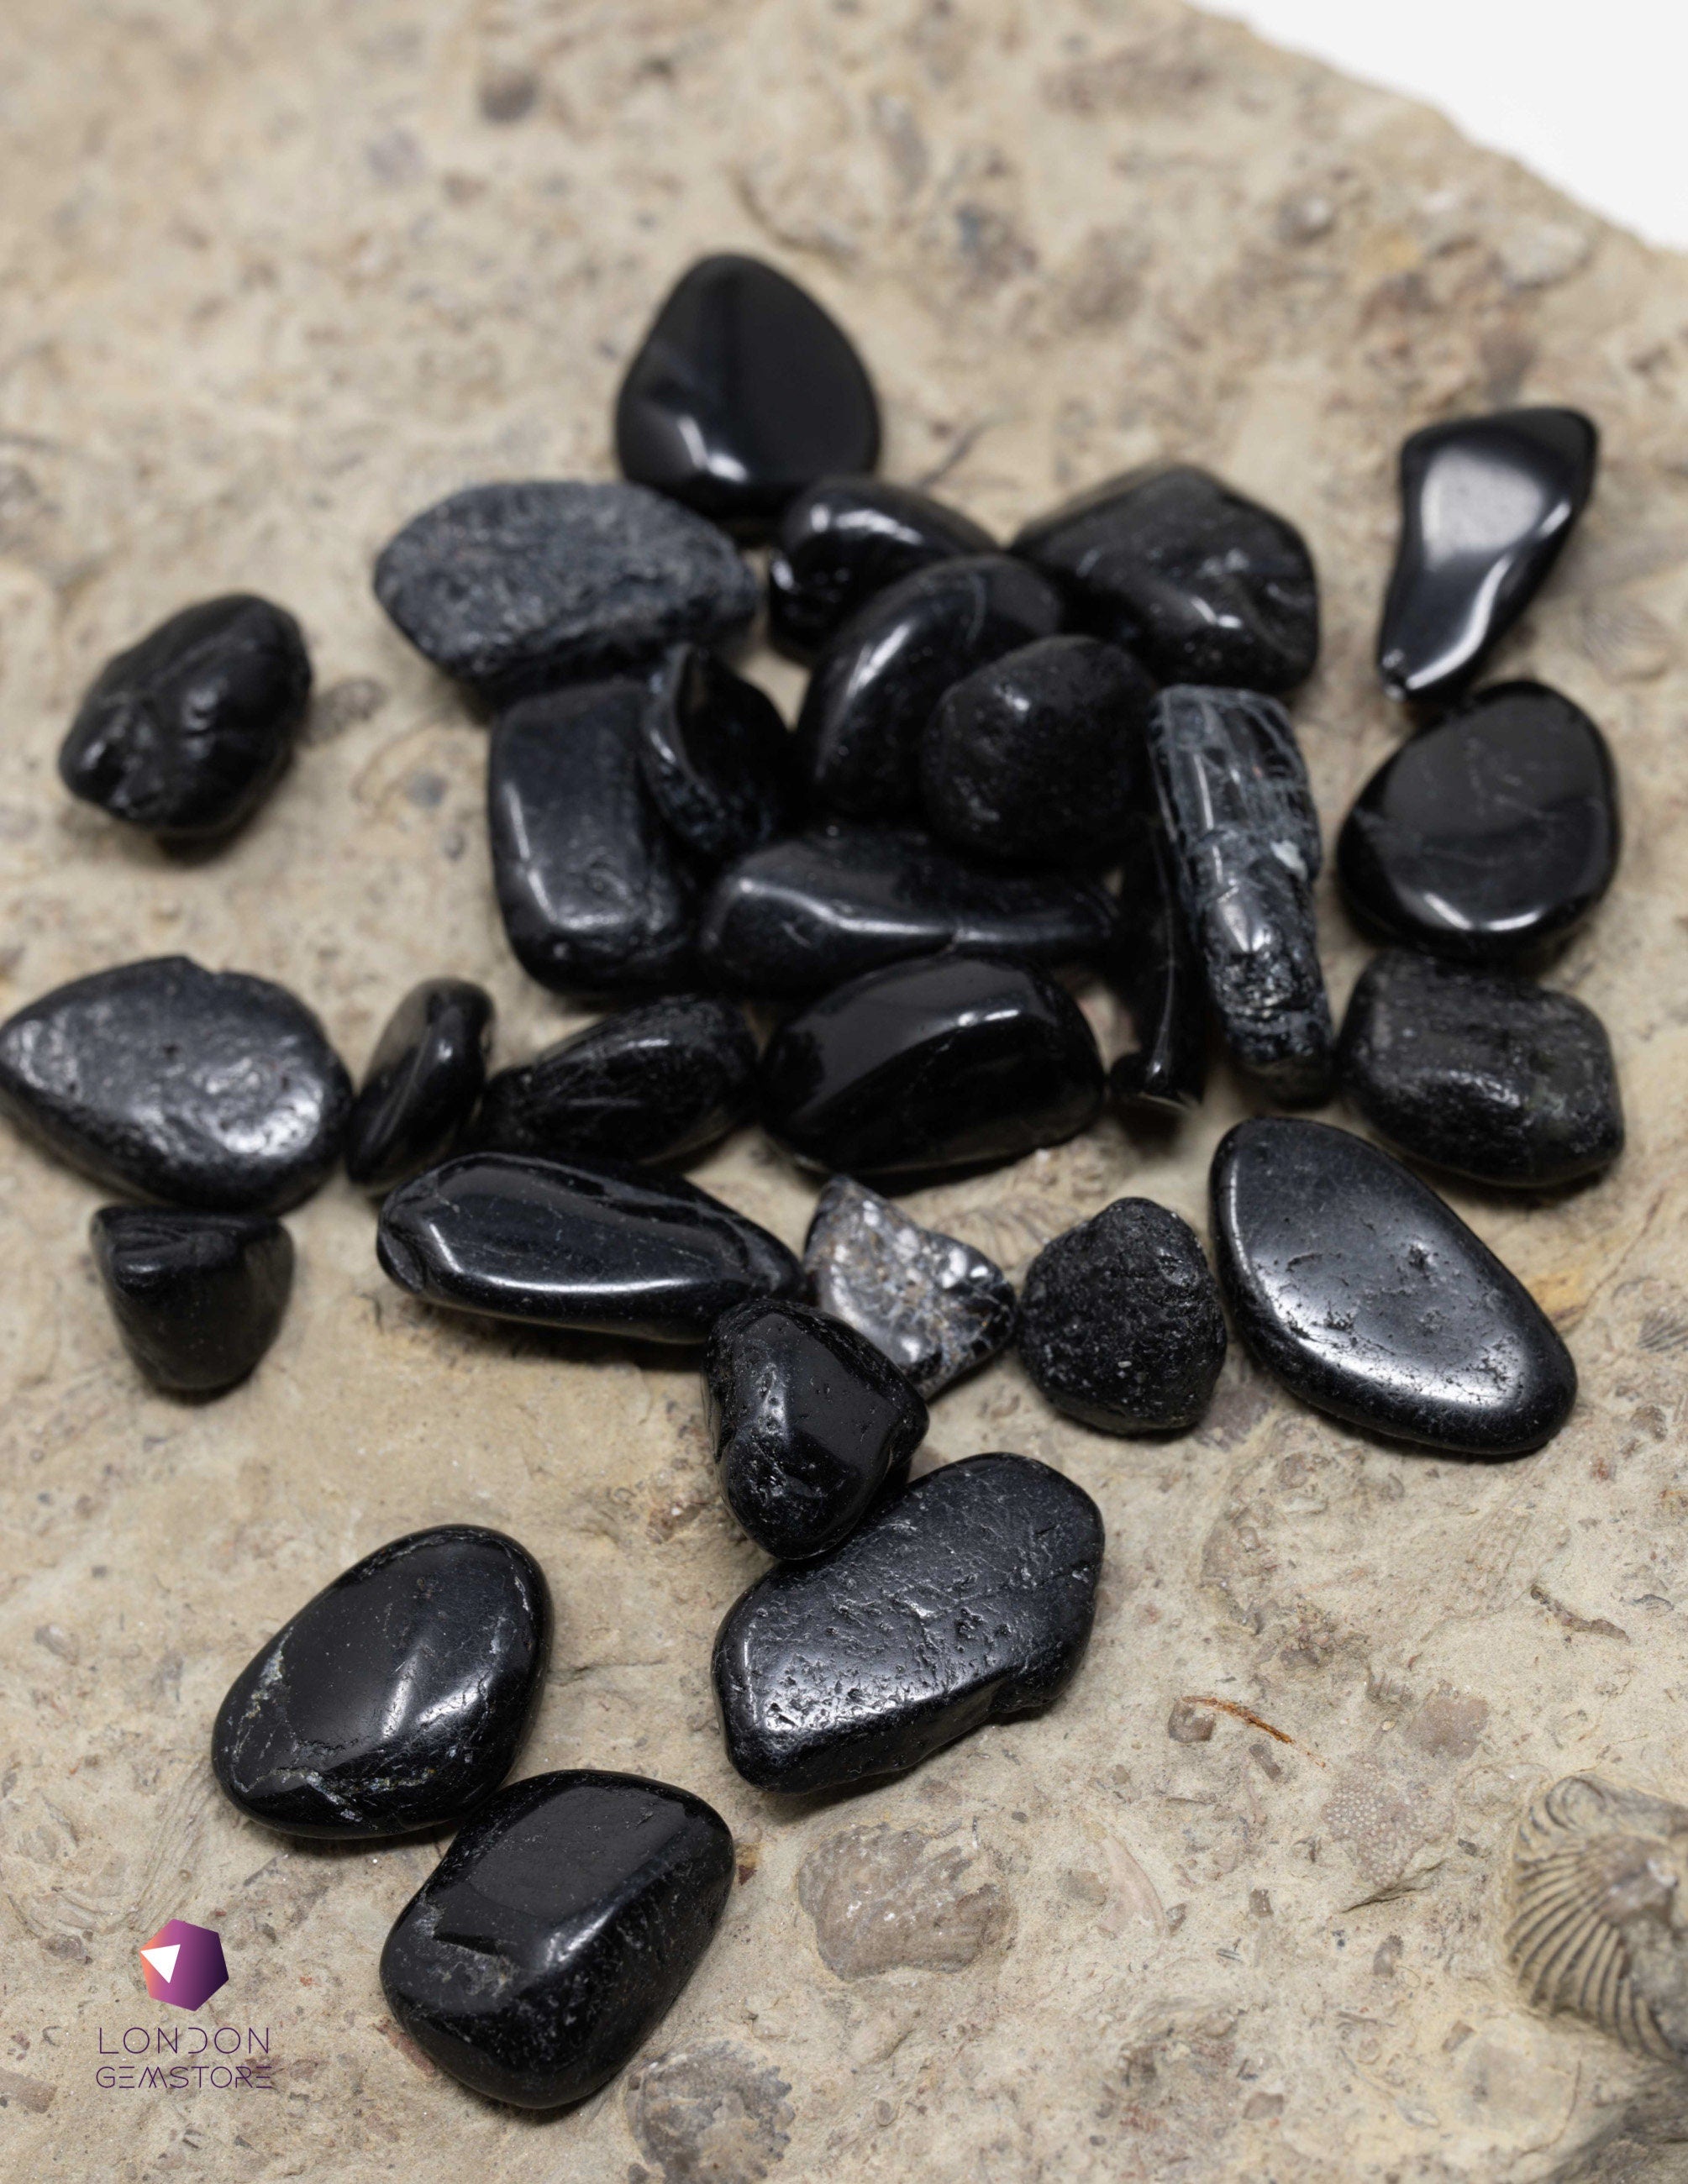 Black Tourmaline Crystal Gravel for Anxiety